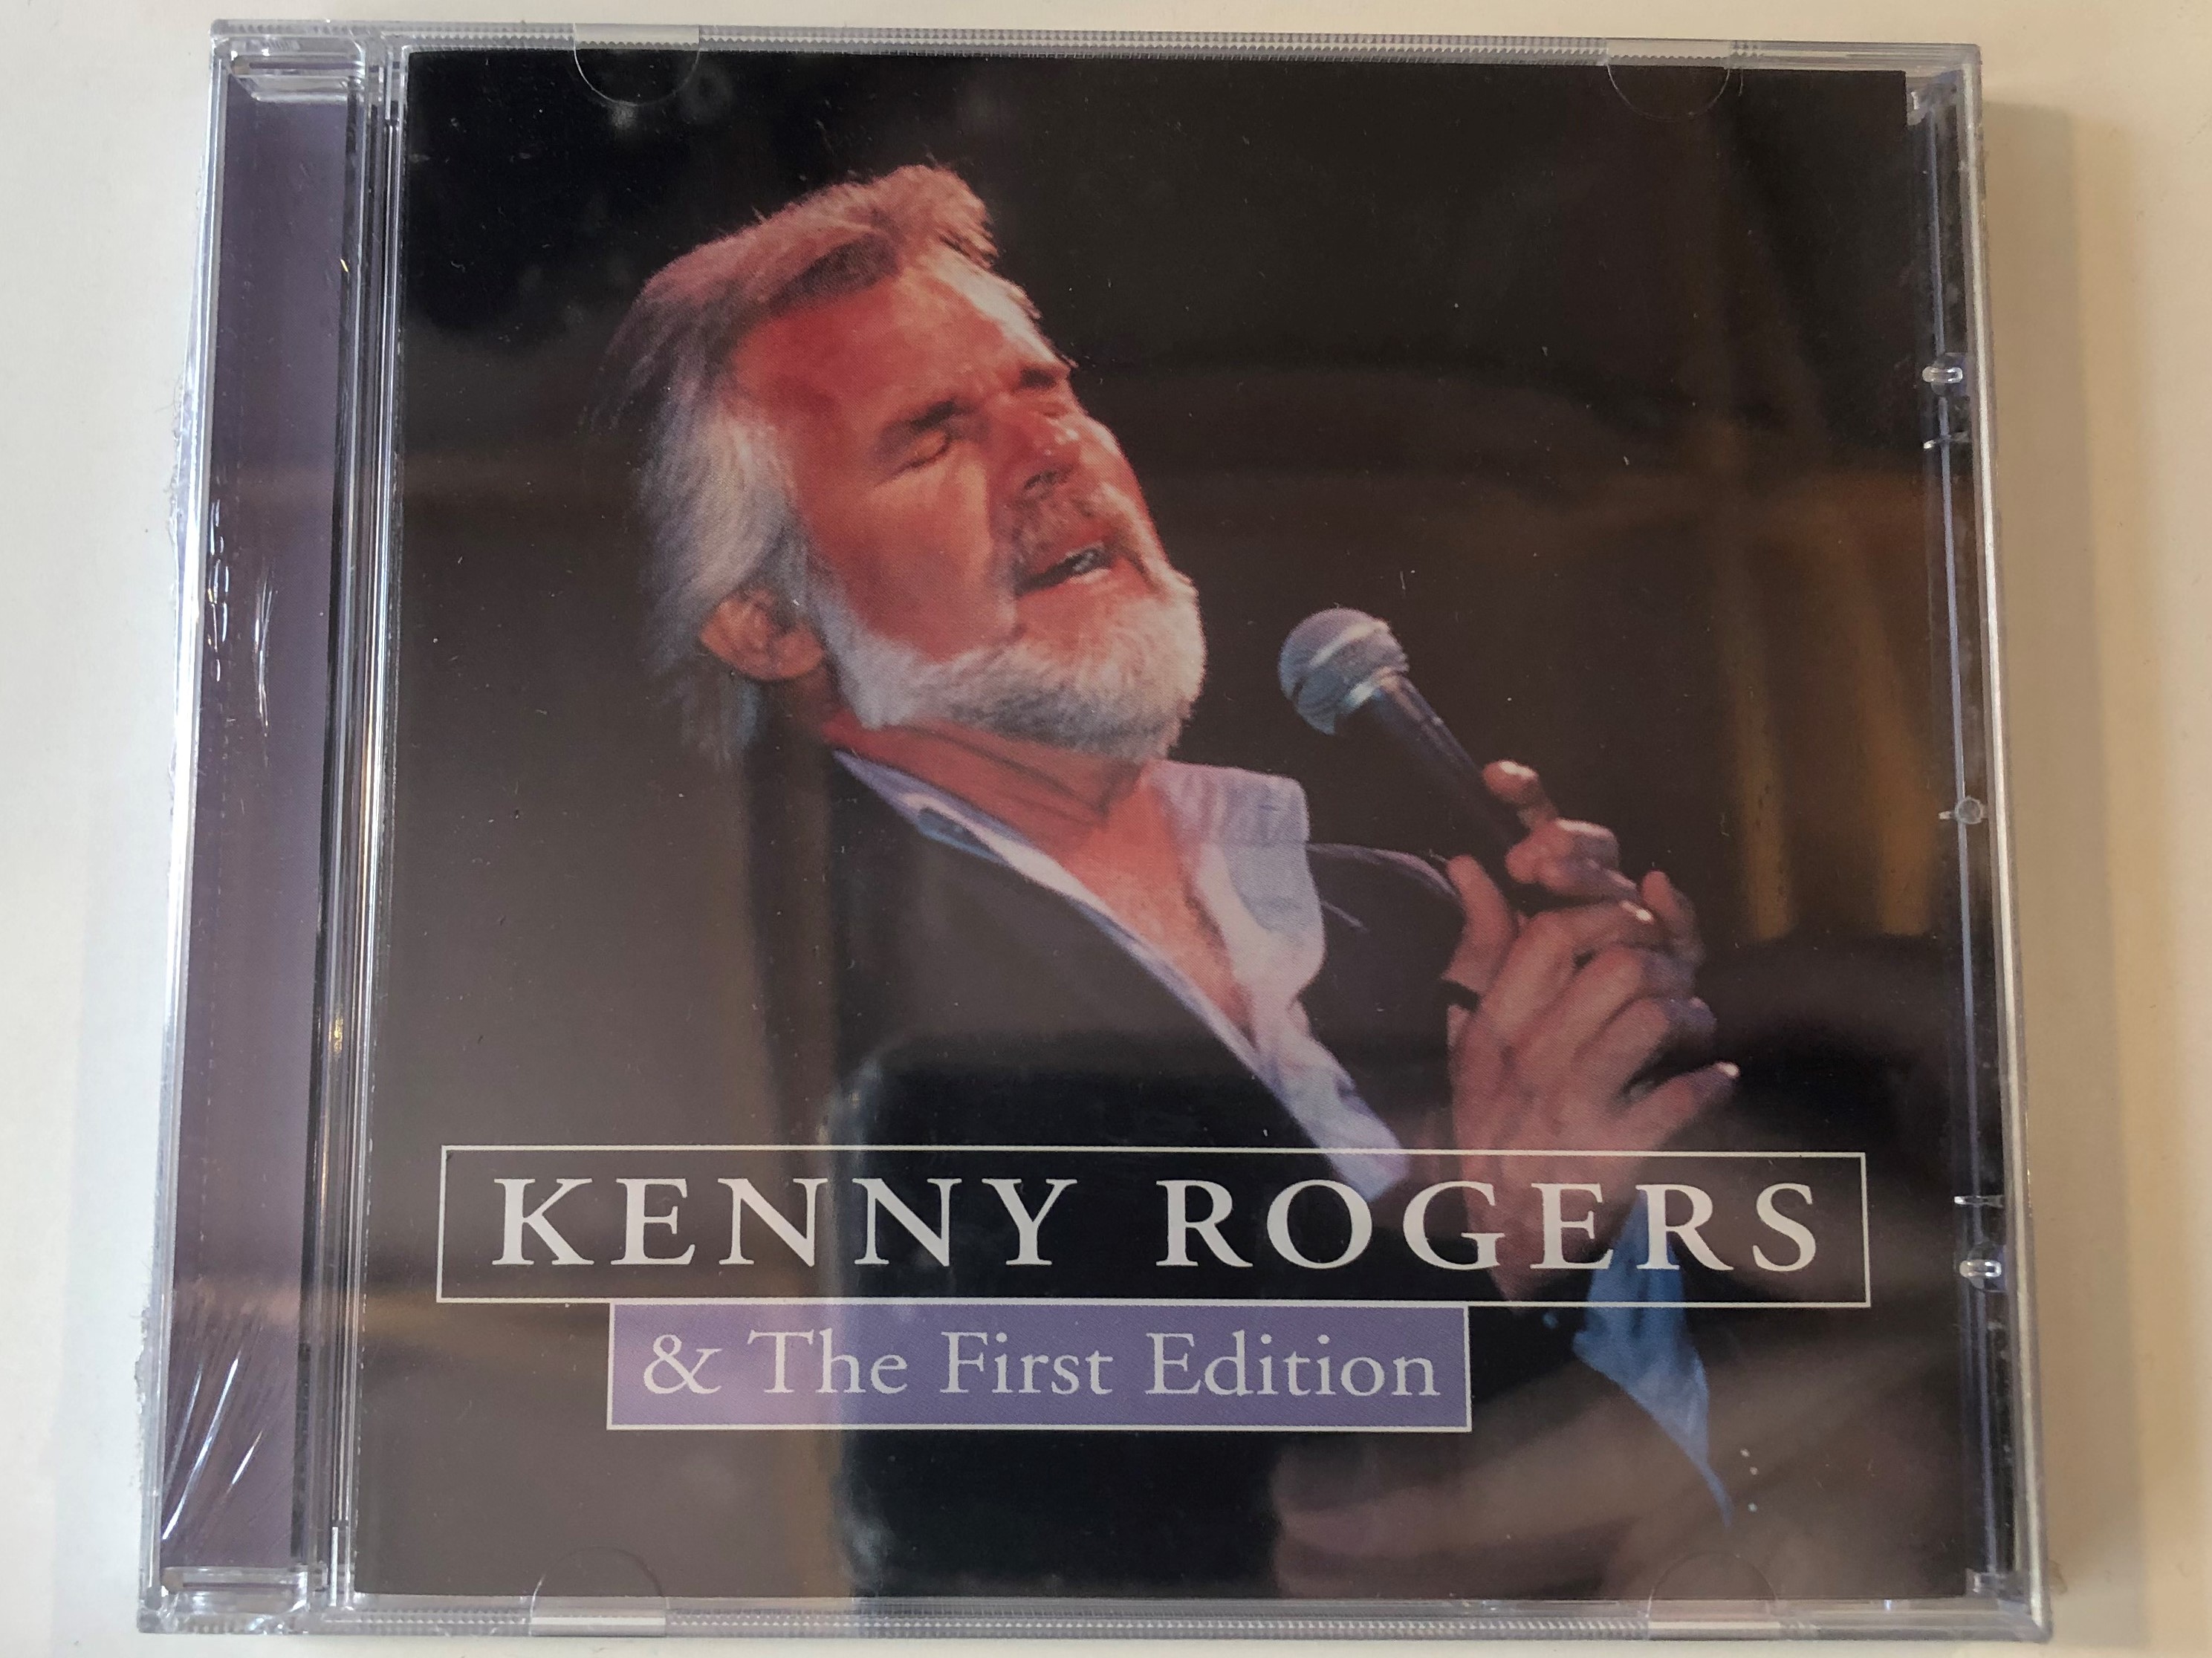 kenny-rogers-the-first-edition-going-for-a-song-audio-cd-5033107104628-1-.jpg